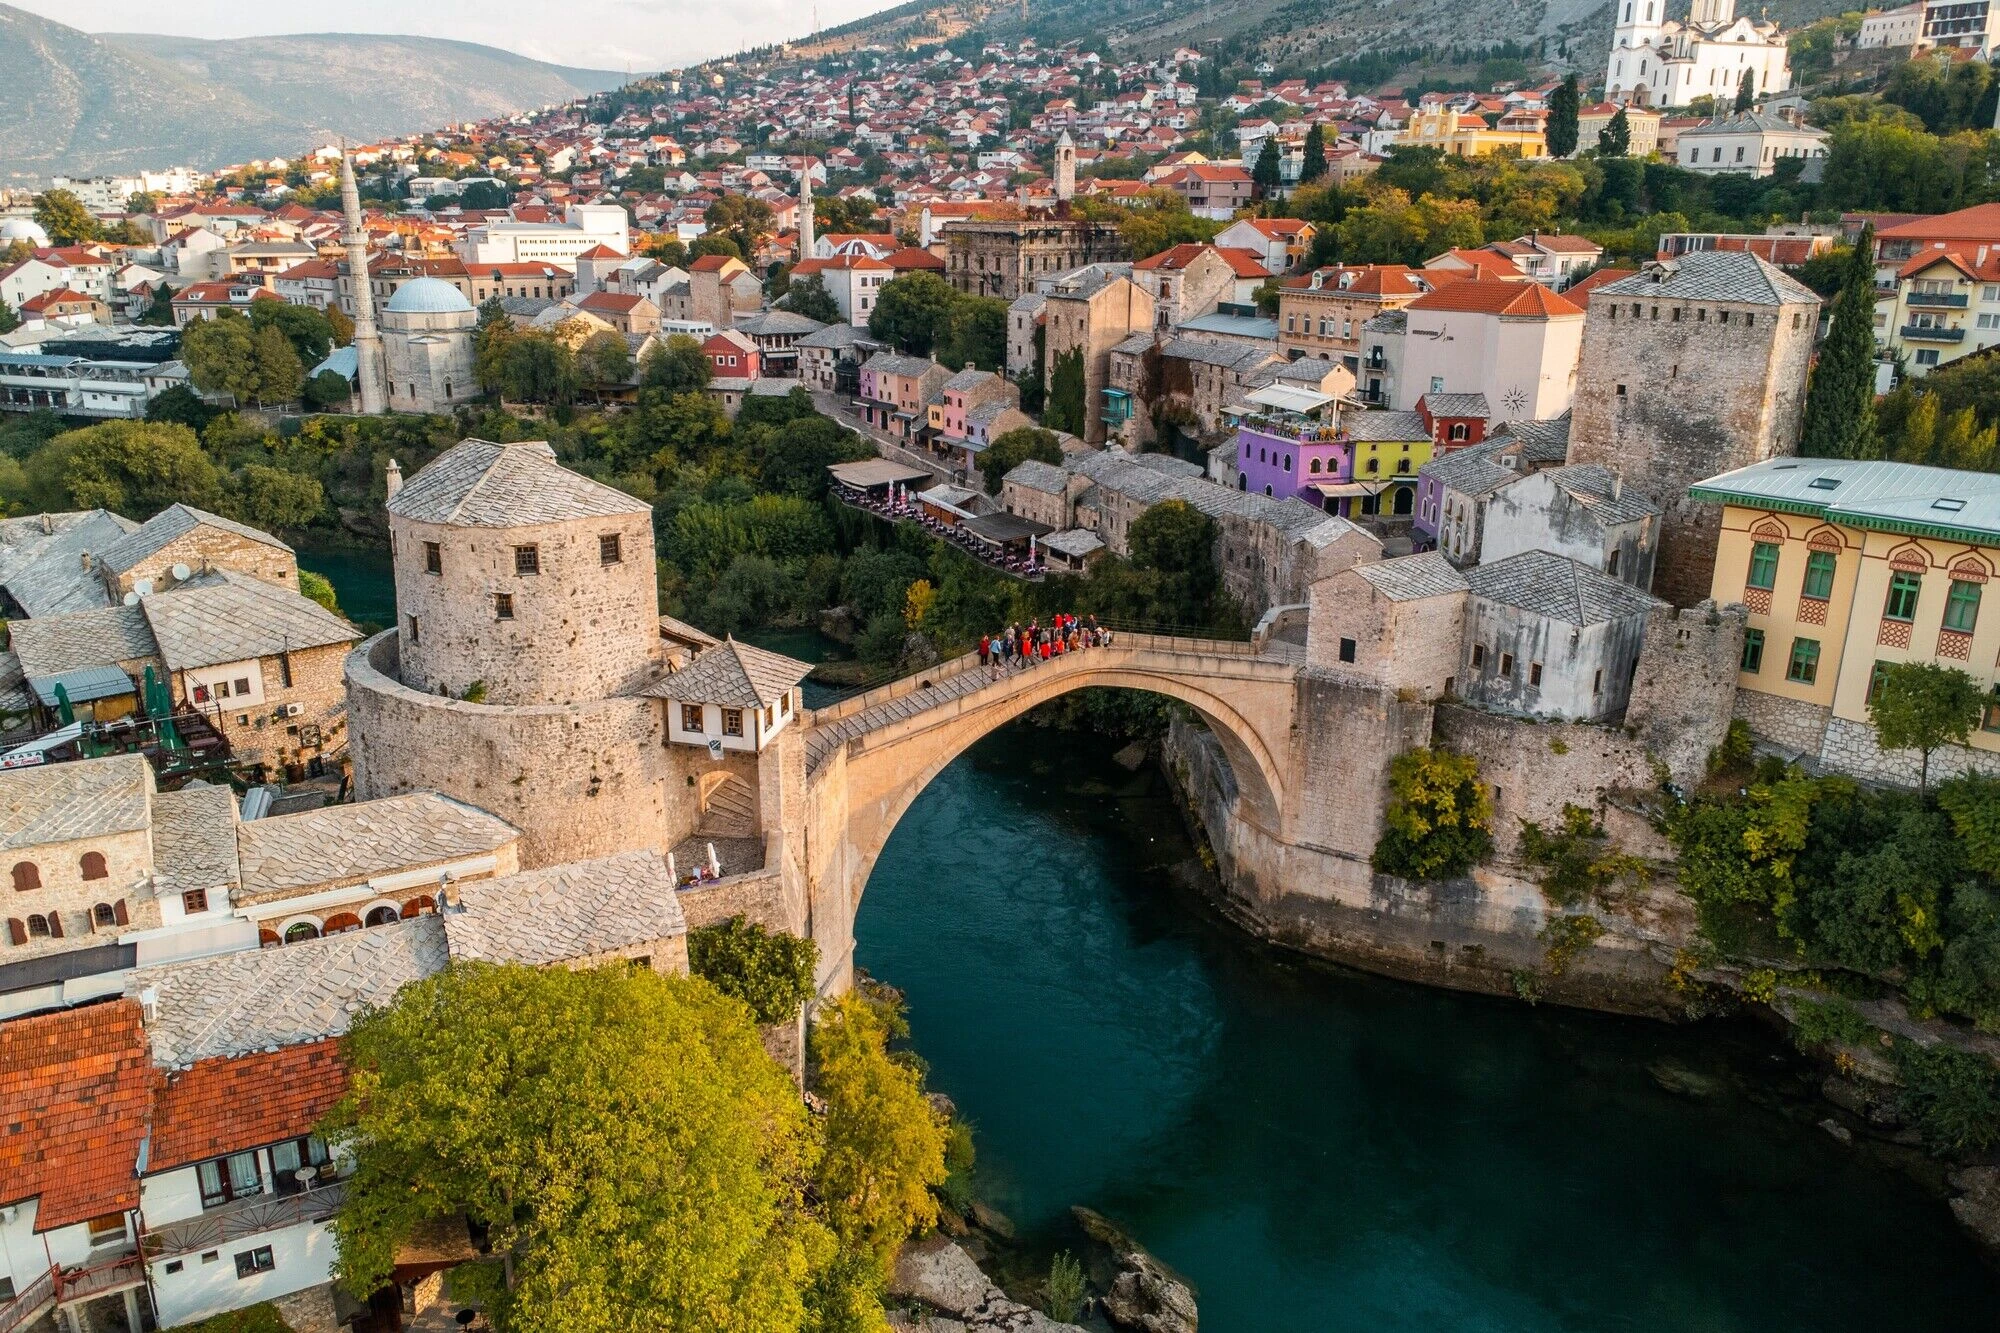 6 Days Backpacking Bosnia and Herzegovina Itinerary for Solo Travelers - A Complete Travel Guide